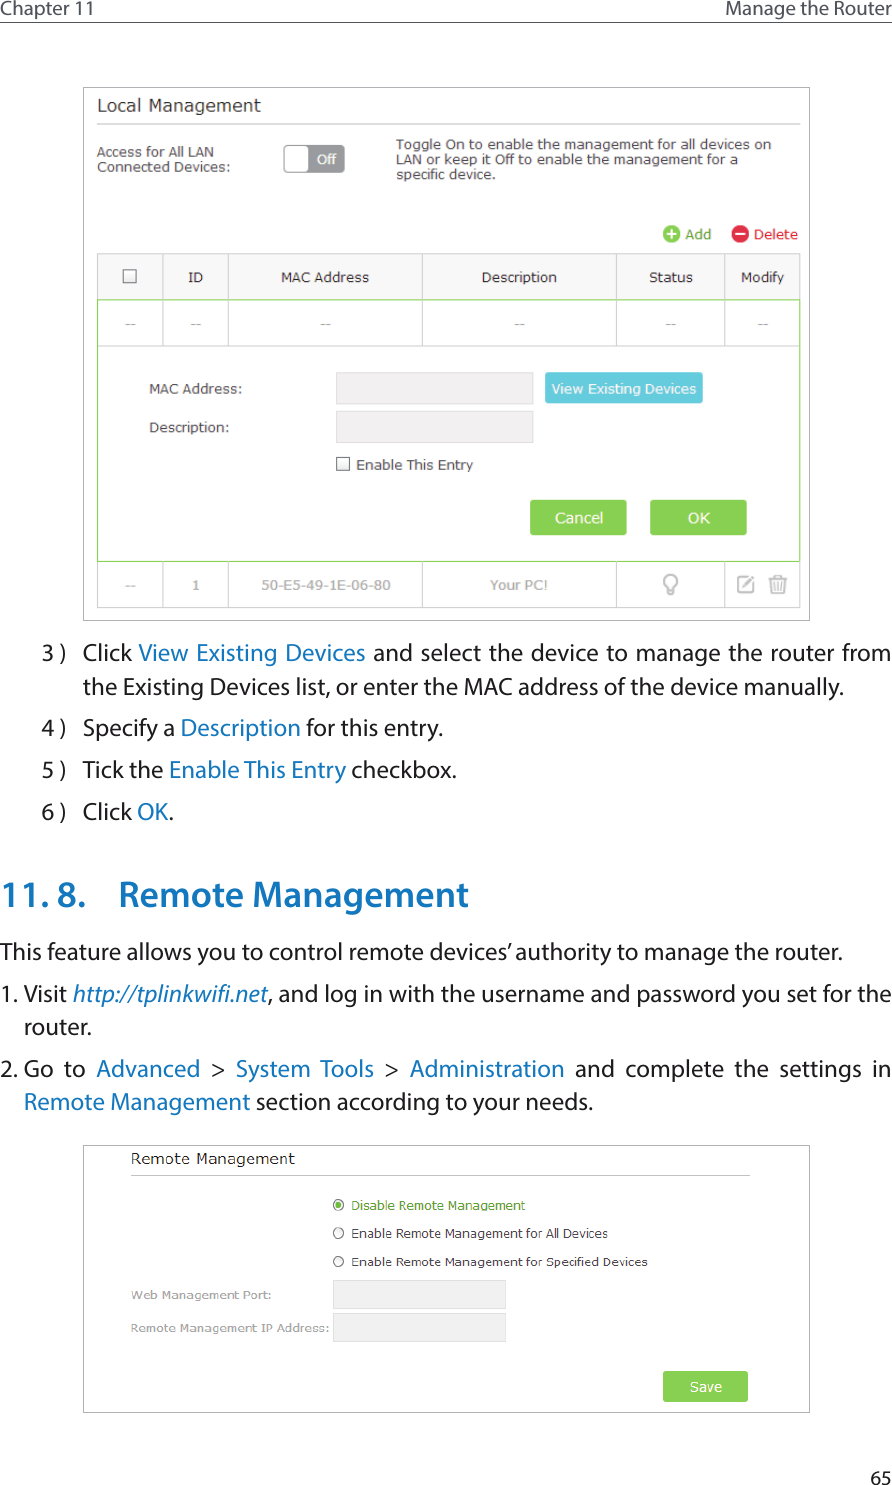 65Chapter 11 Manage the Router 3 )  Click View Existing Devices and select the device to manage the router from the Existing Devices list, or enter the MAC address of the device manually.4 )  Specify a Description for this entry.5 )  Tick the Enable This Entry checkbox.6 )  Click OK.11. 8.  Remote ManagementThis feature allows you to control remote devices’ authority to manage the router.1. Visit http://tplinkwifi.net, and log in with the username and password you set for the router.2. Go to Advanced &gt; System Tools &gt;  Administration and complete the settings in Remote Management section according to your needs.